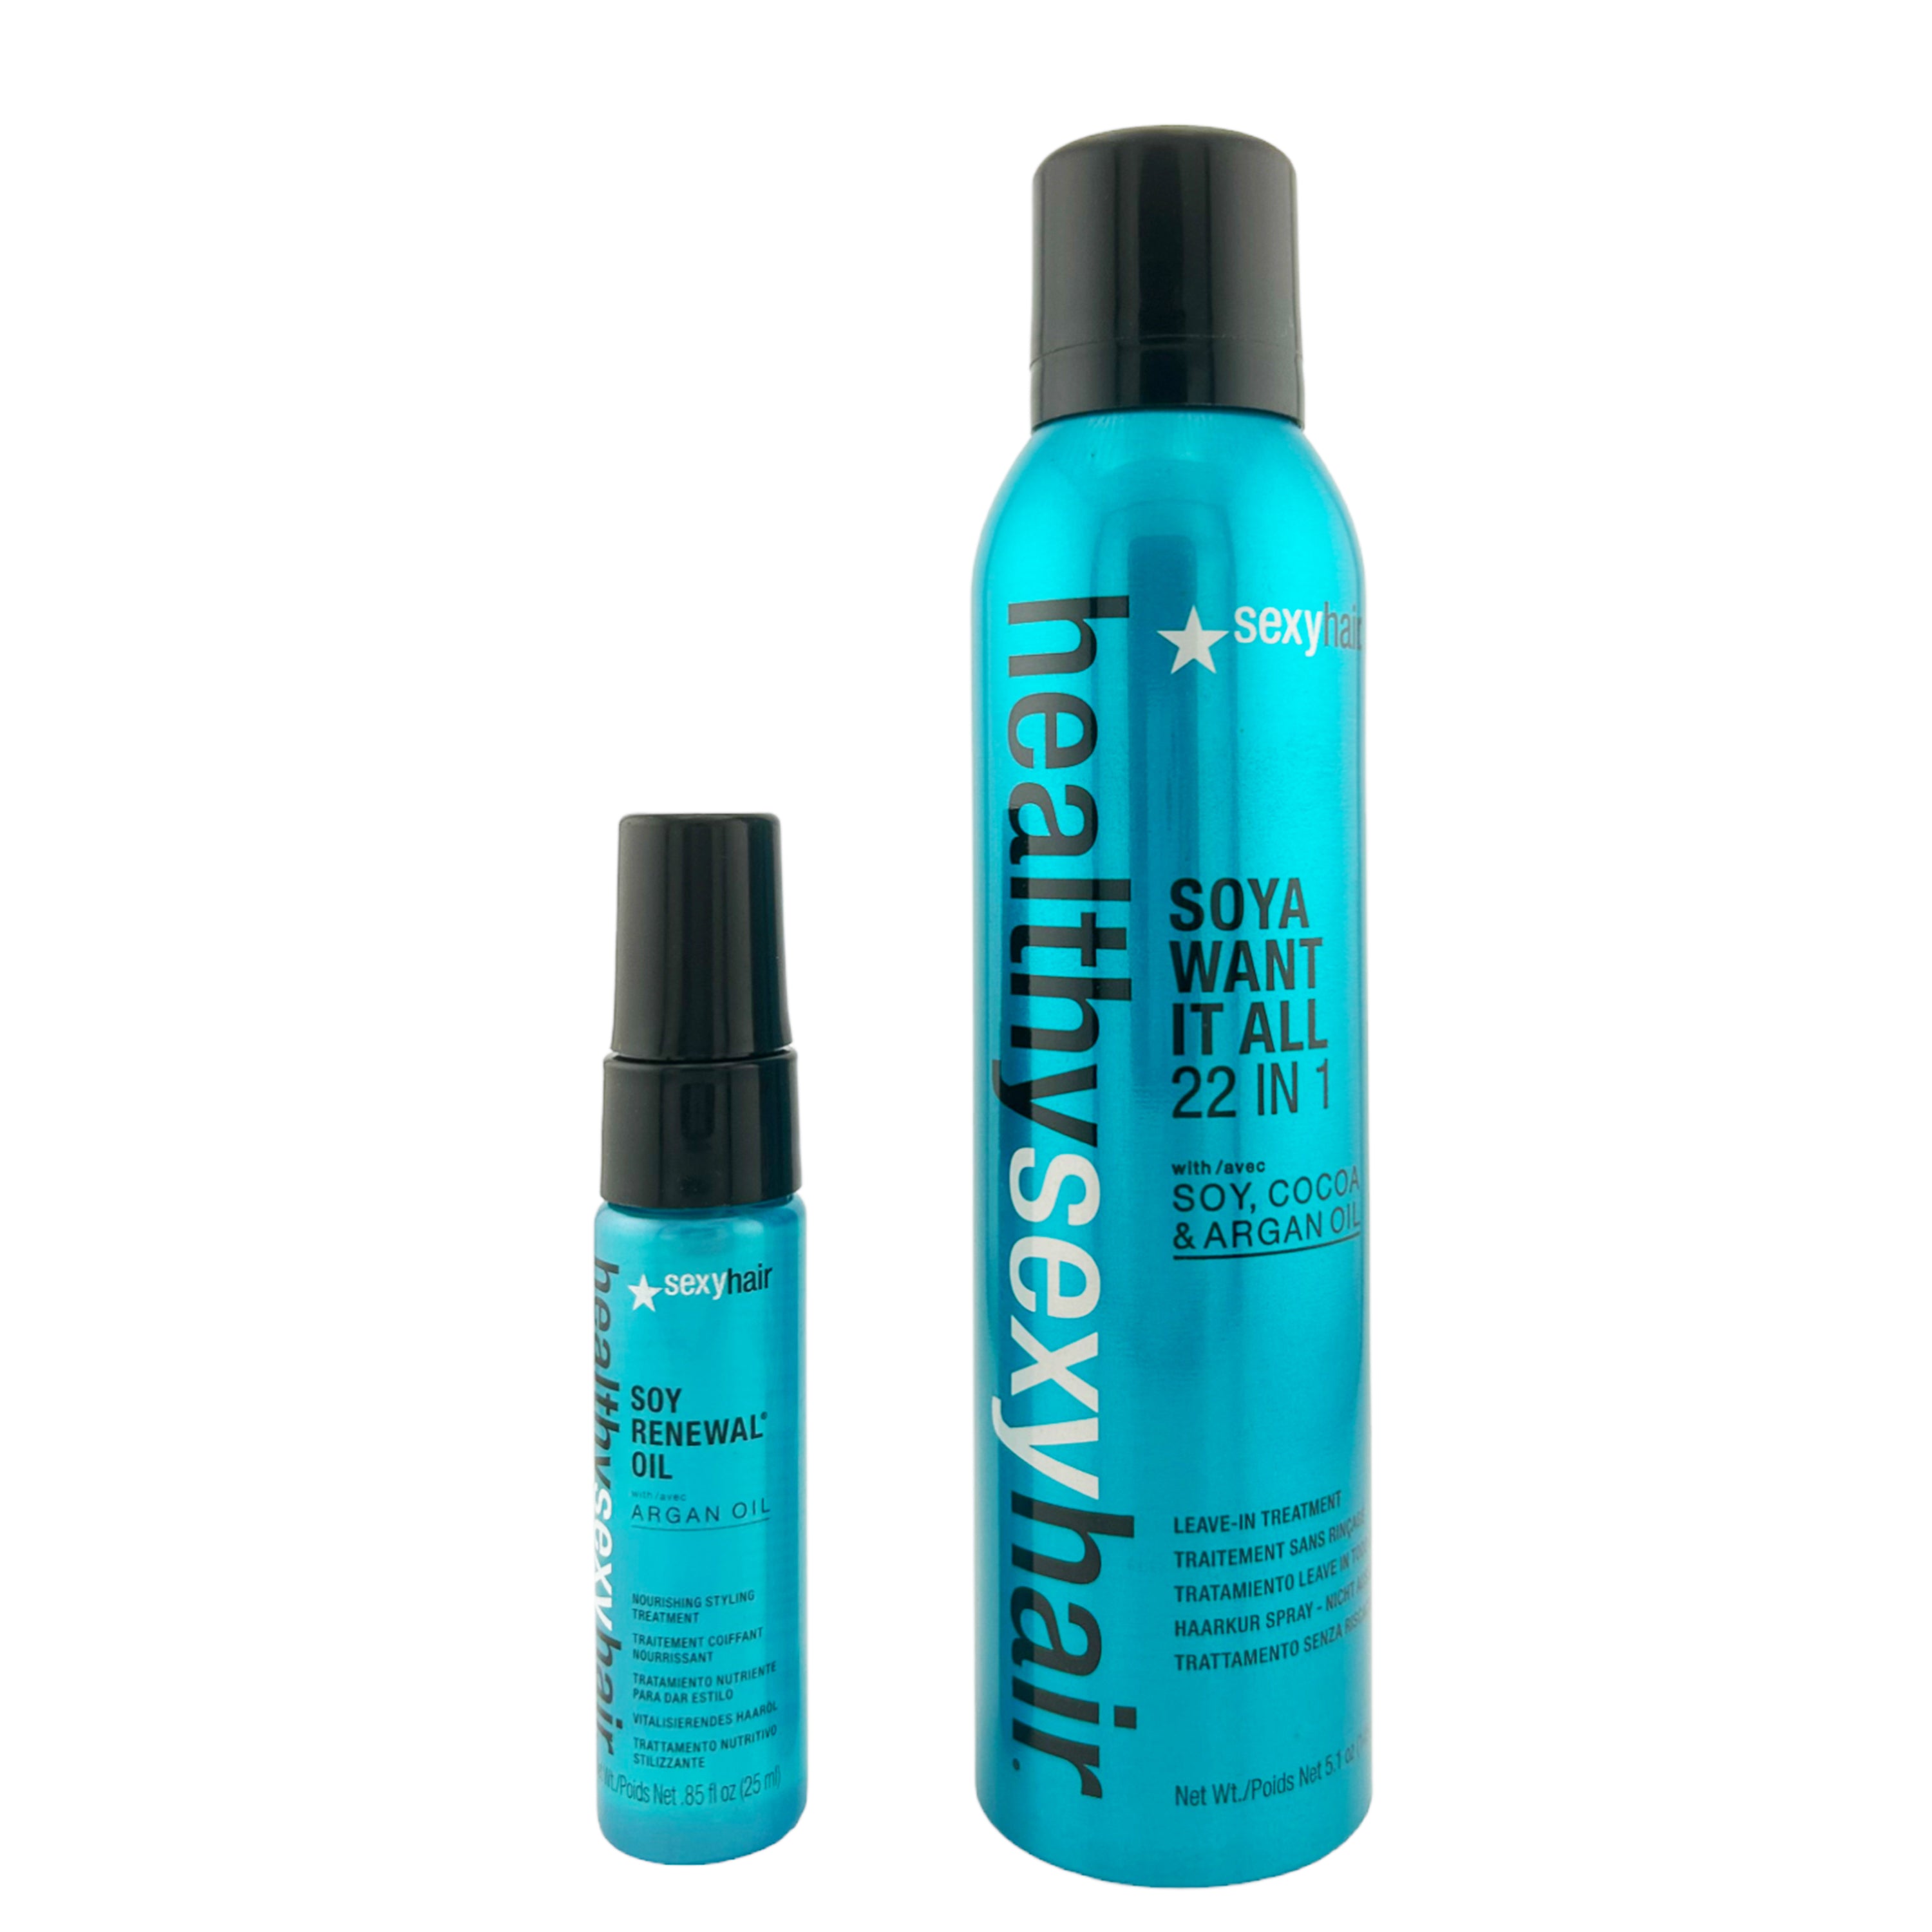 Sexy Hair Healthy Sexy Hair Duo (Soya Want It All 22 in 1 Leave-In Treatment, Soy Renewal Nourishing Styling Treatment)